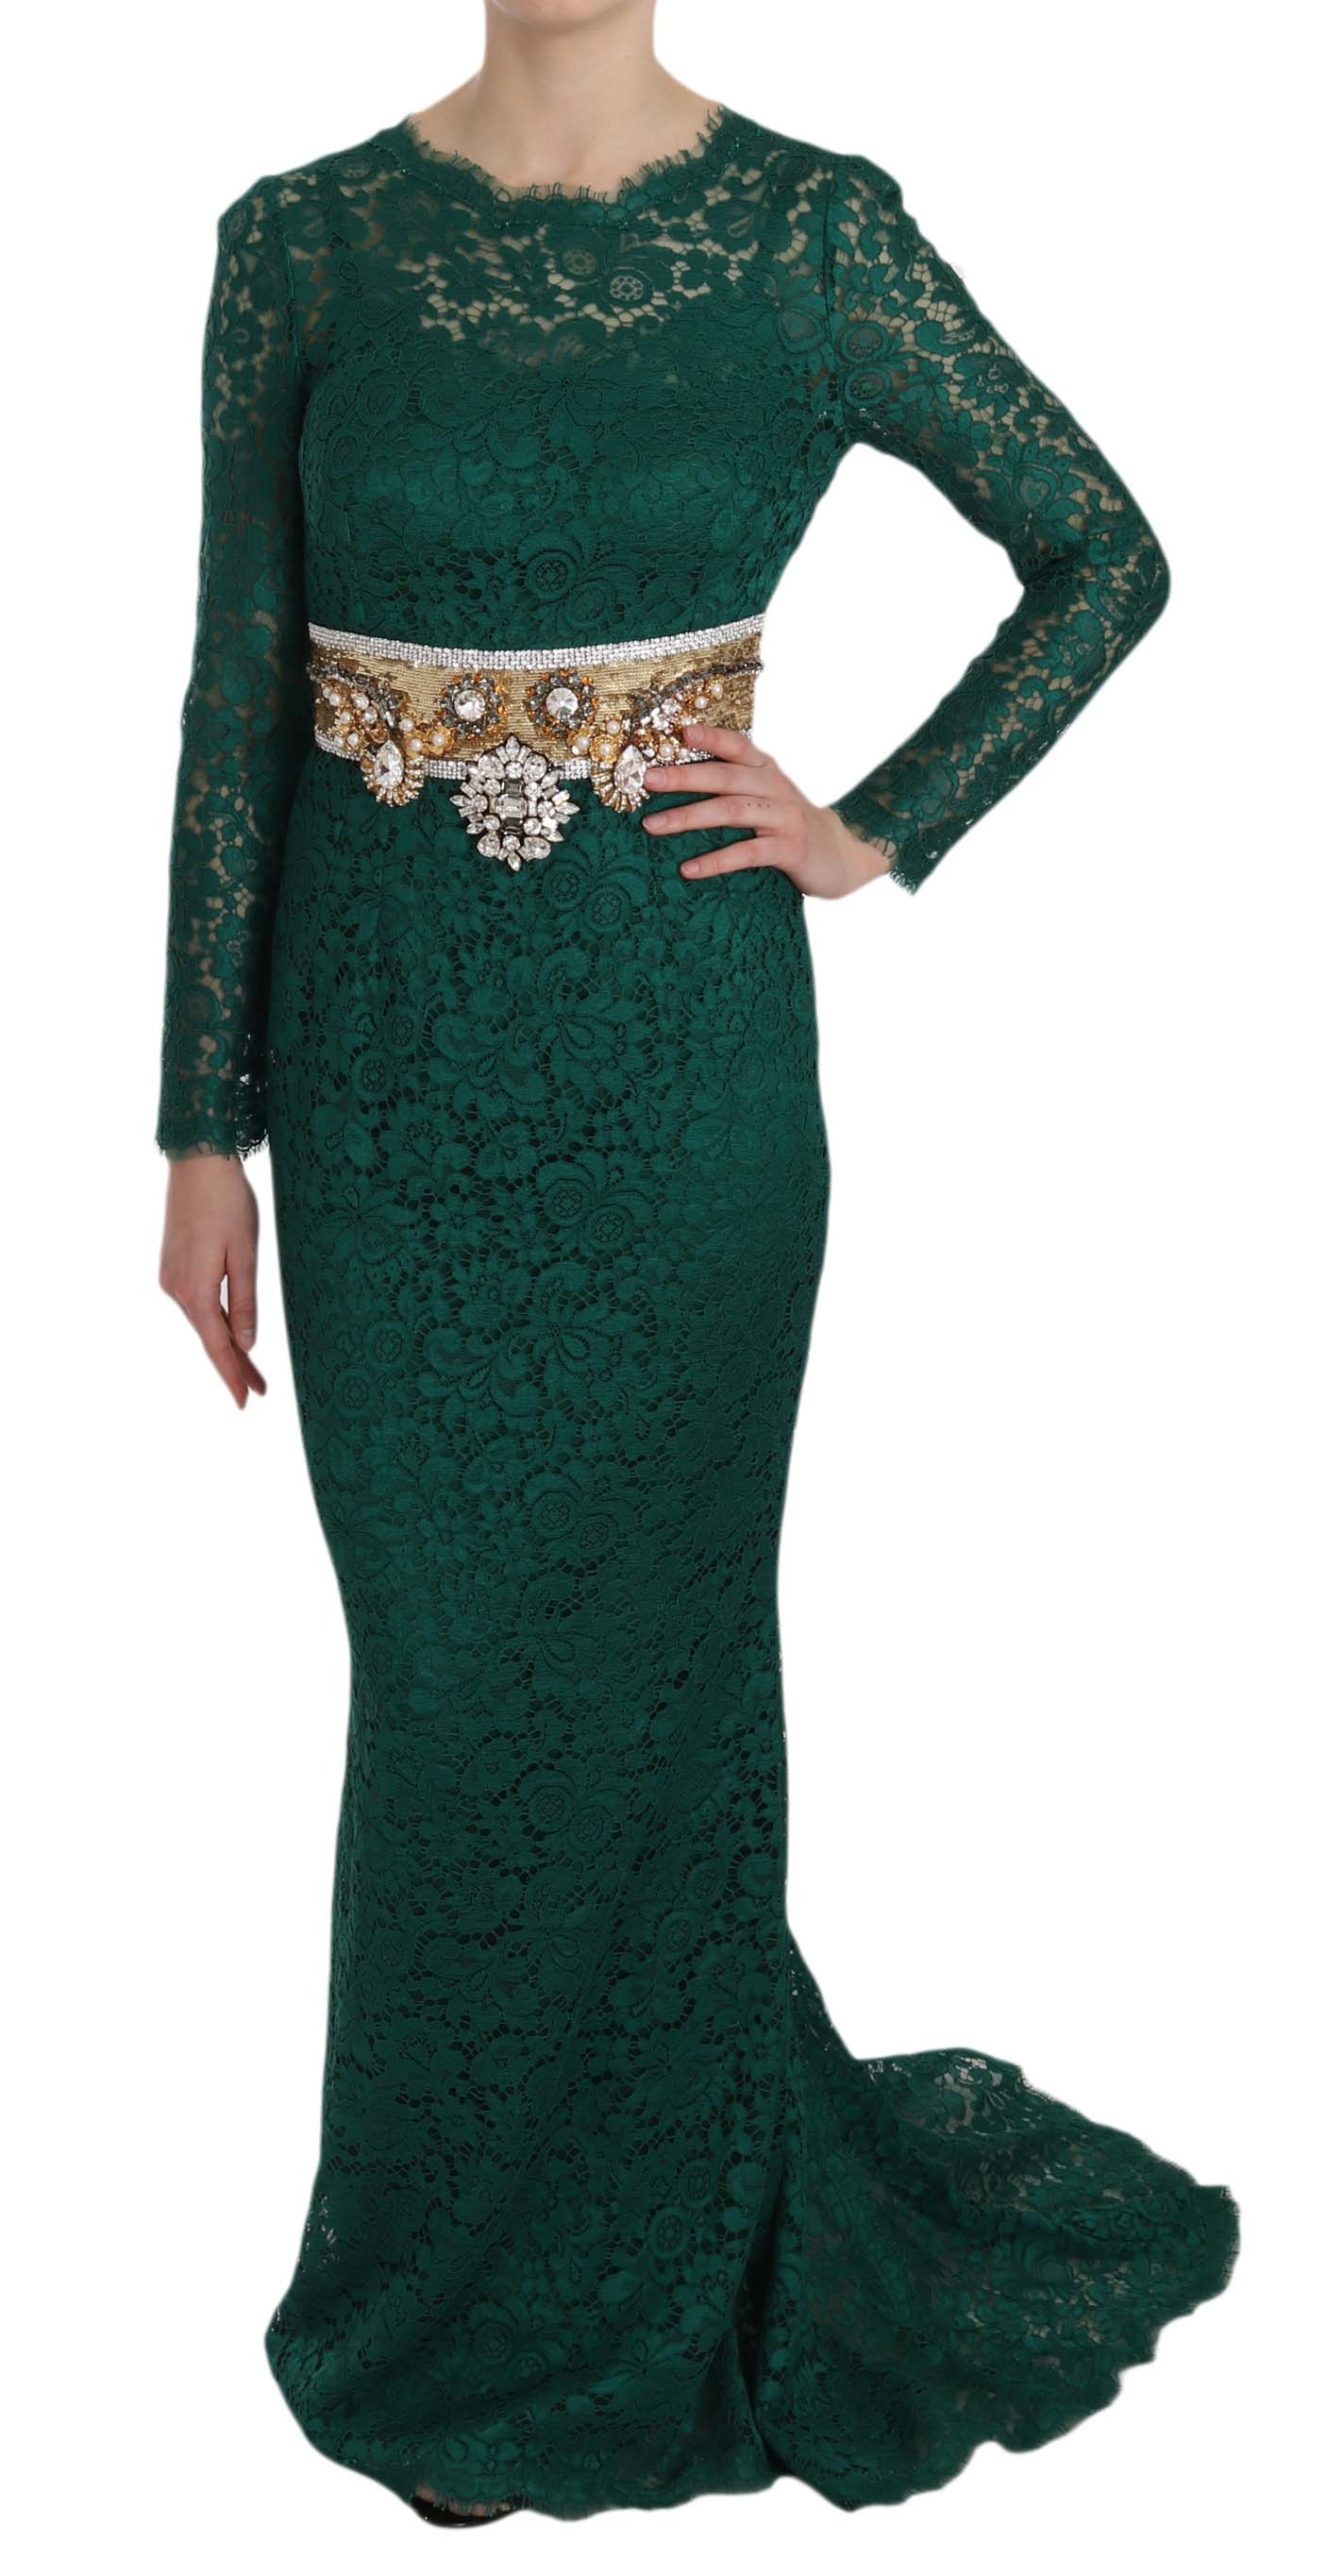 Sequined Crystal Embellished Sheath Gown Dress